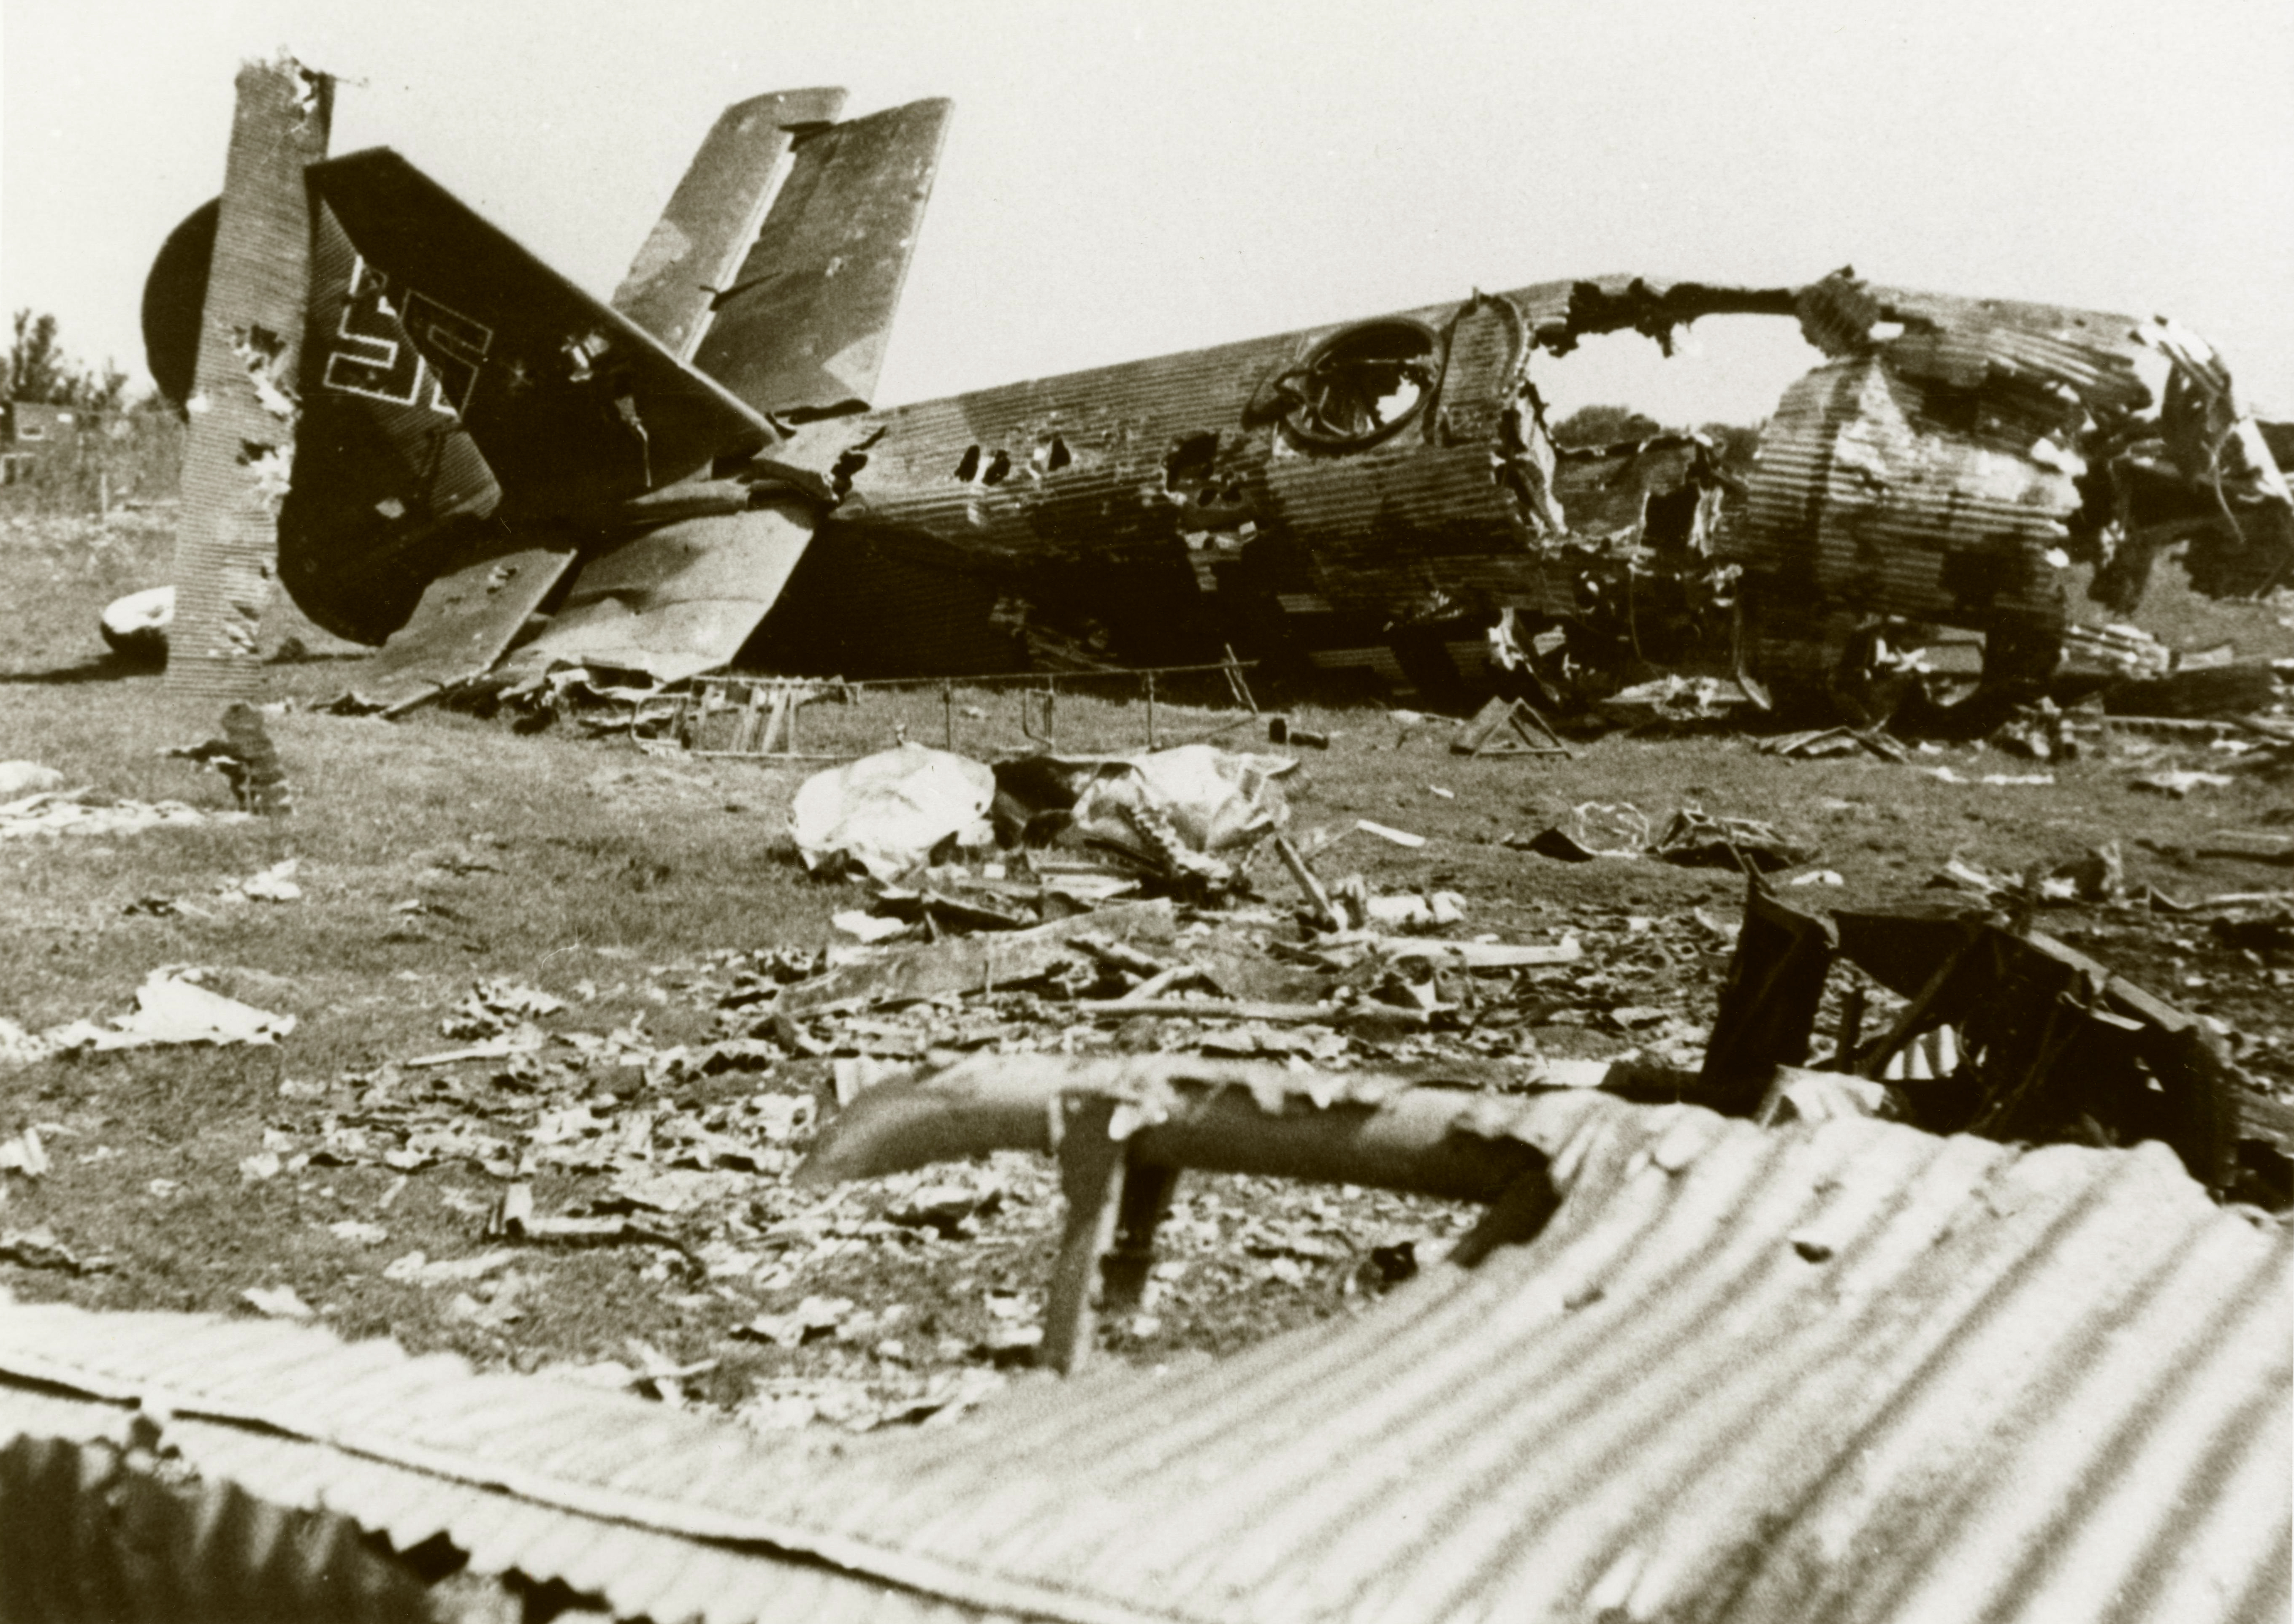 Fall Gelb Junkers Ju 52 3m shot down near the Leyweg road in the Hague May 1940 web 01